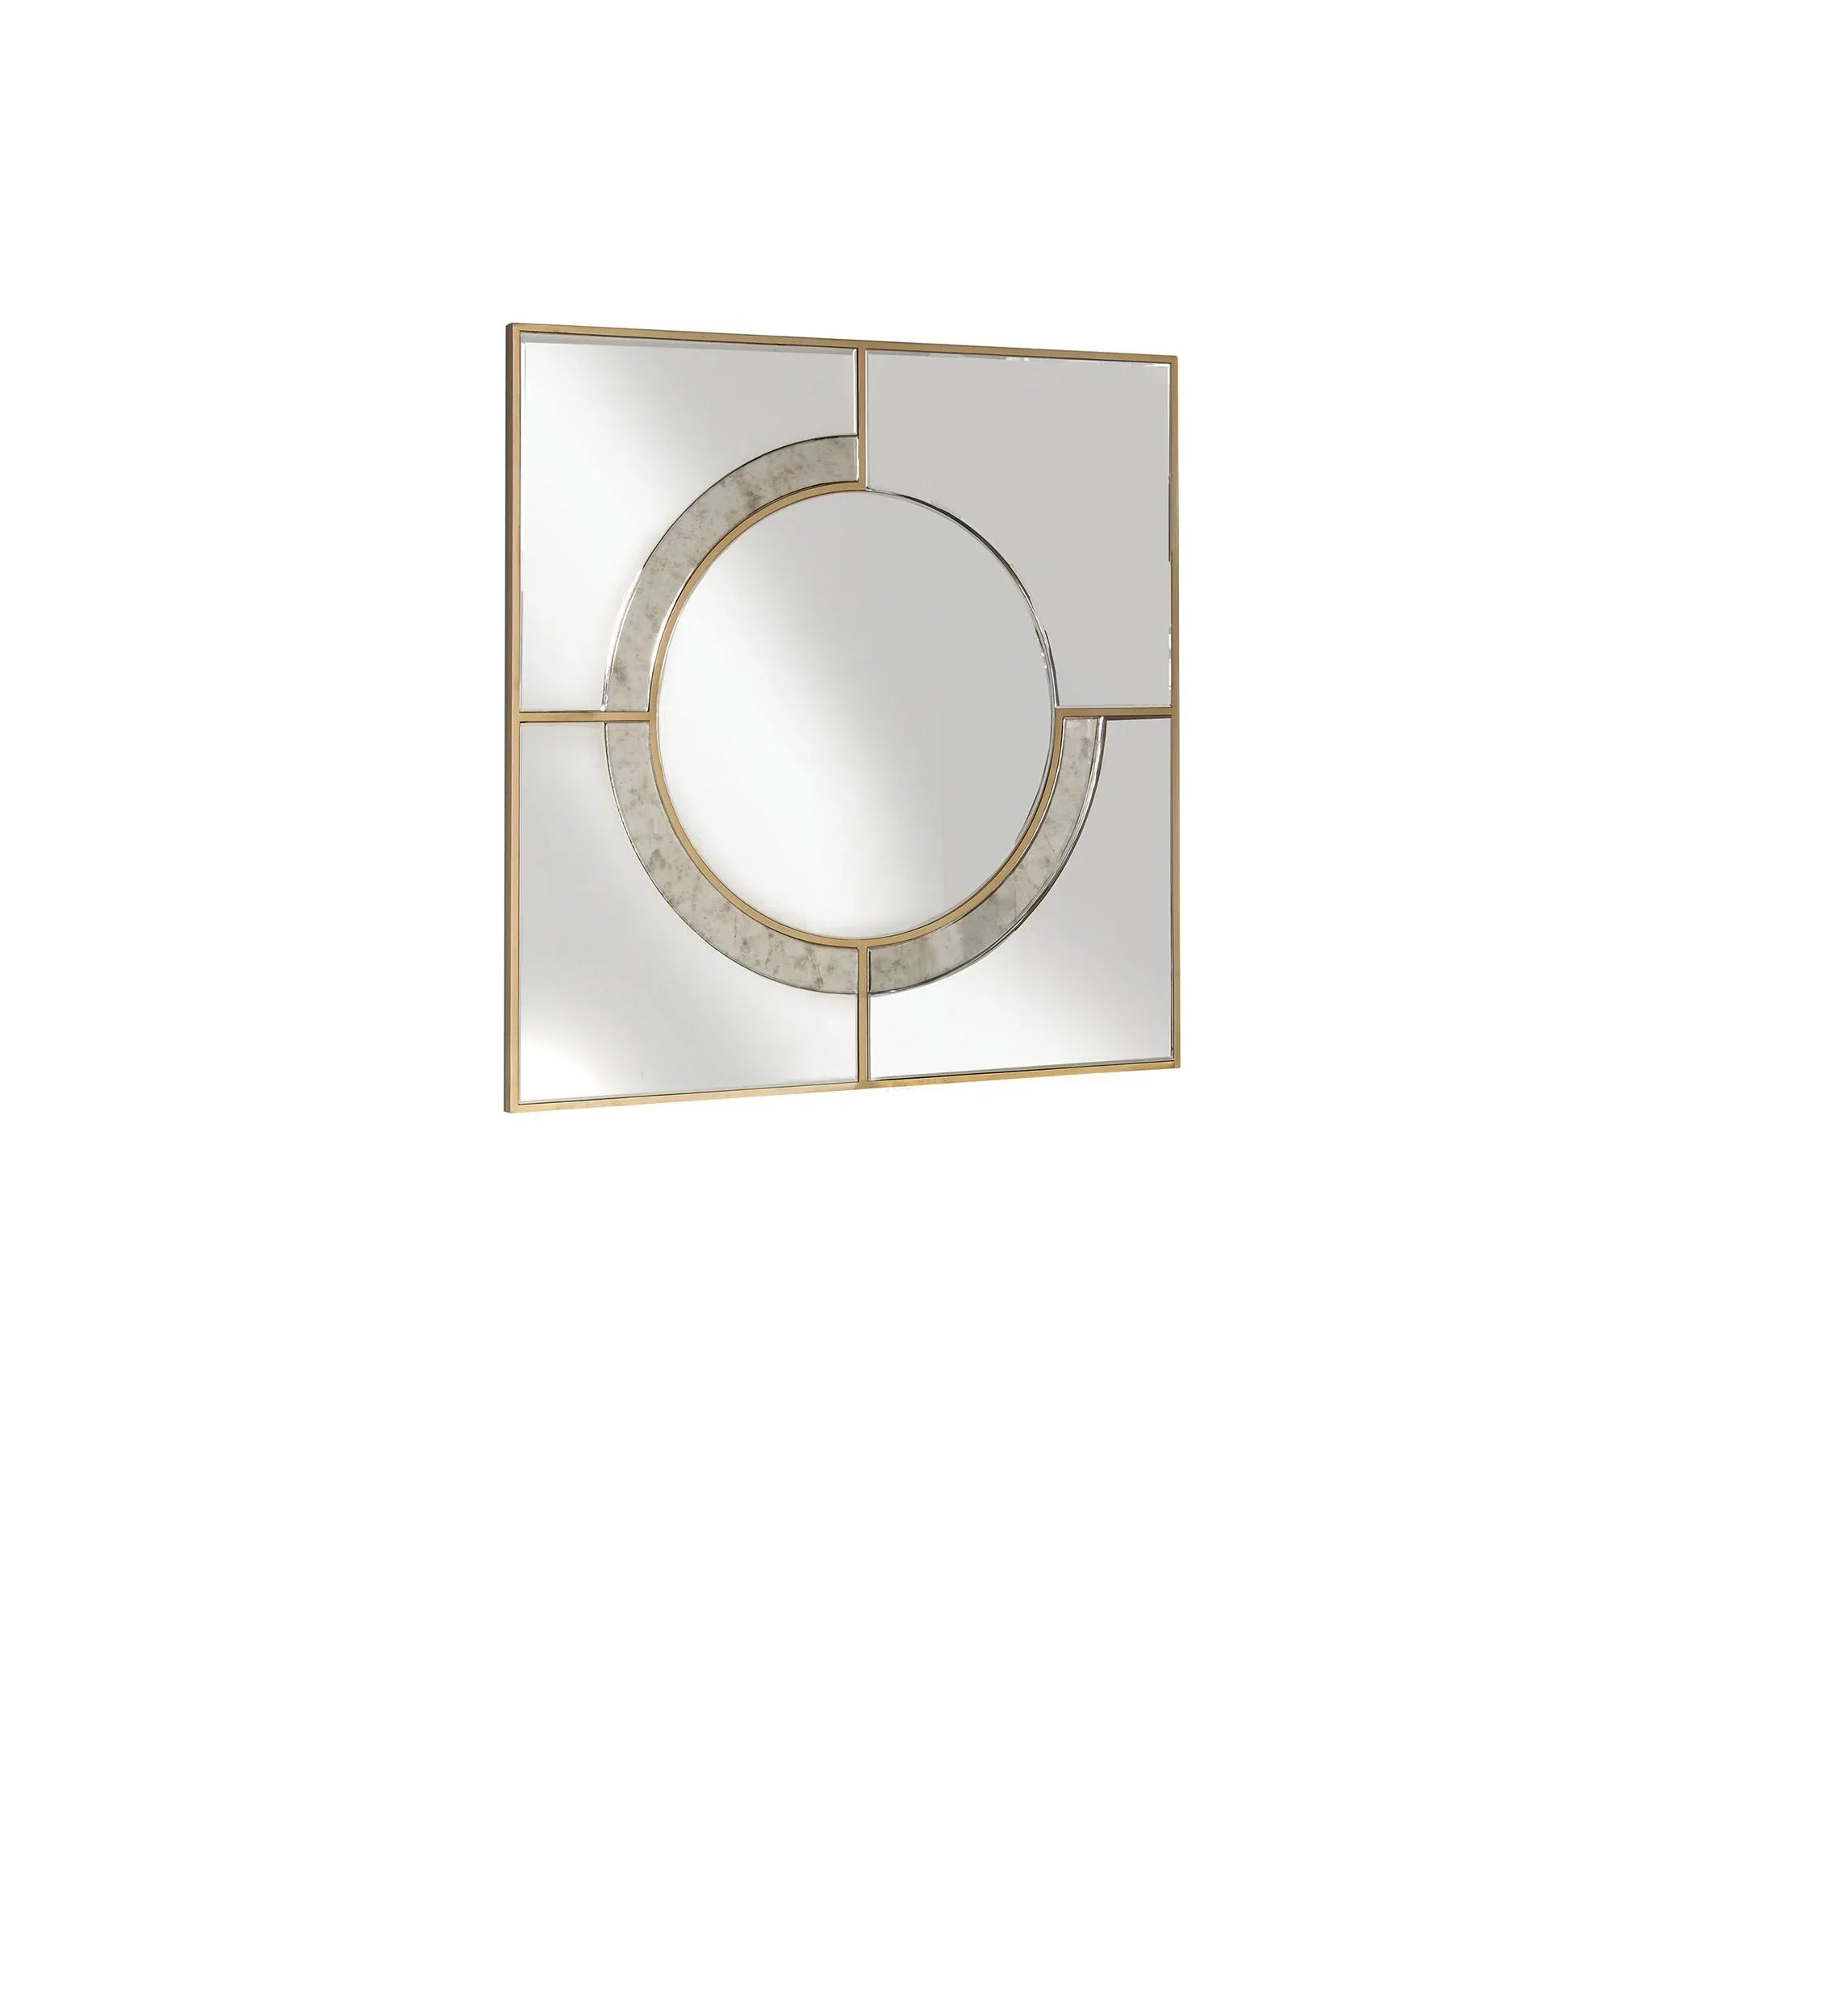 Hanne Mirrored Wall Decor Model 97389 By ACME Furniture